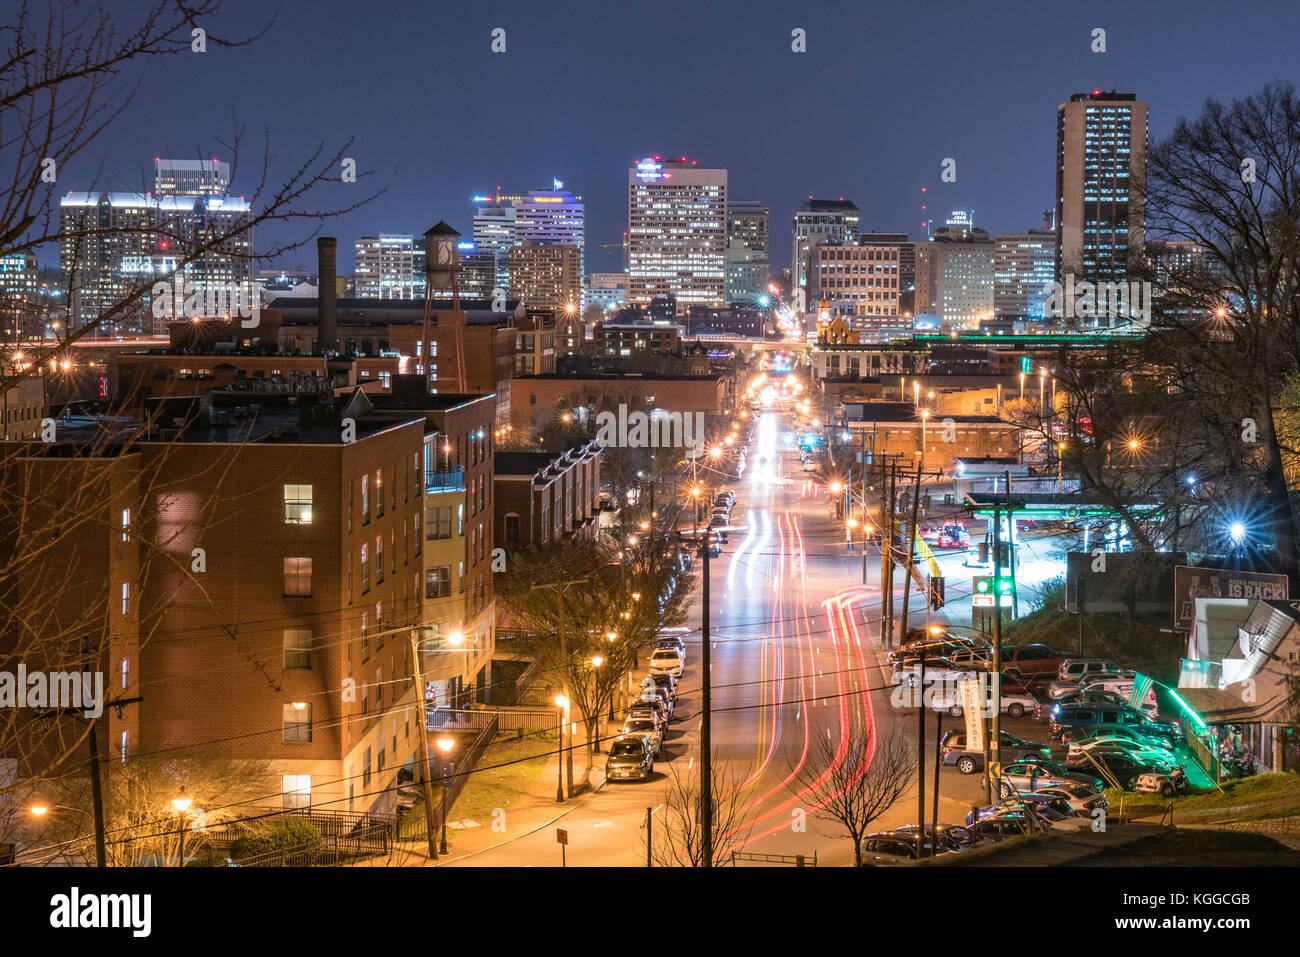 RICHMOND, VA - MARCH 24: View of the Richmond, Virginia skyline from Libby Hill Park looking down Main St on March 24, 2017 Stock Photo